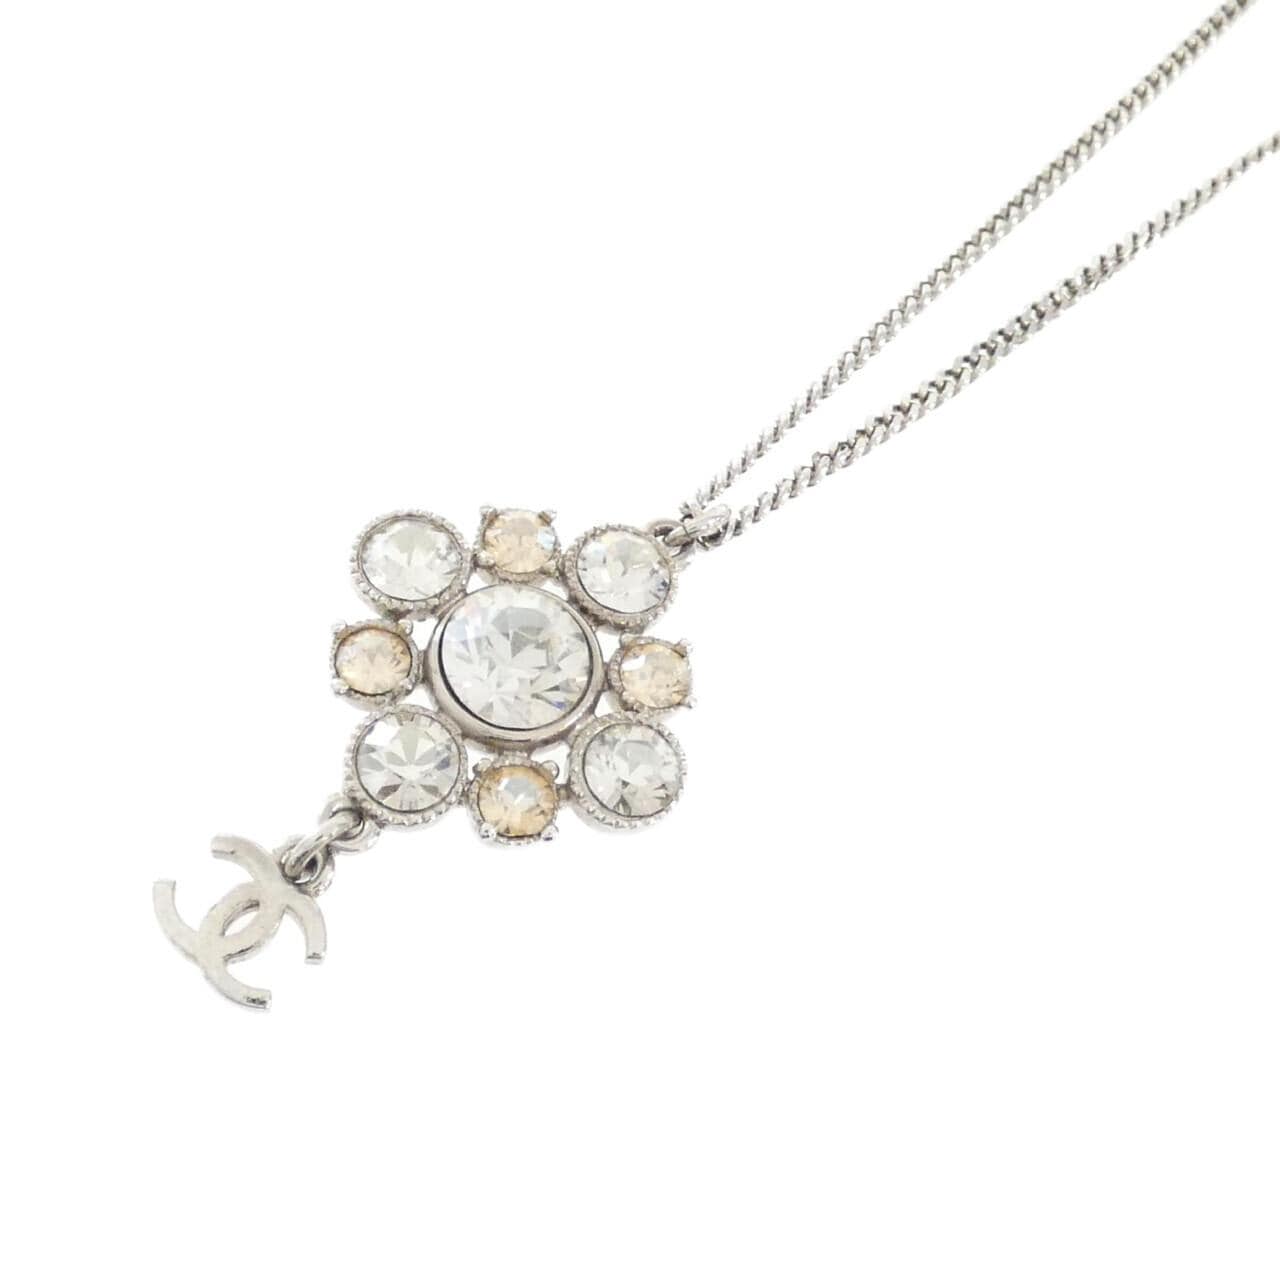 CHANEL 37251 necklace